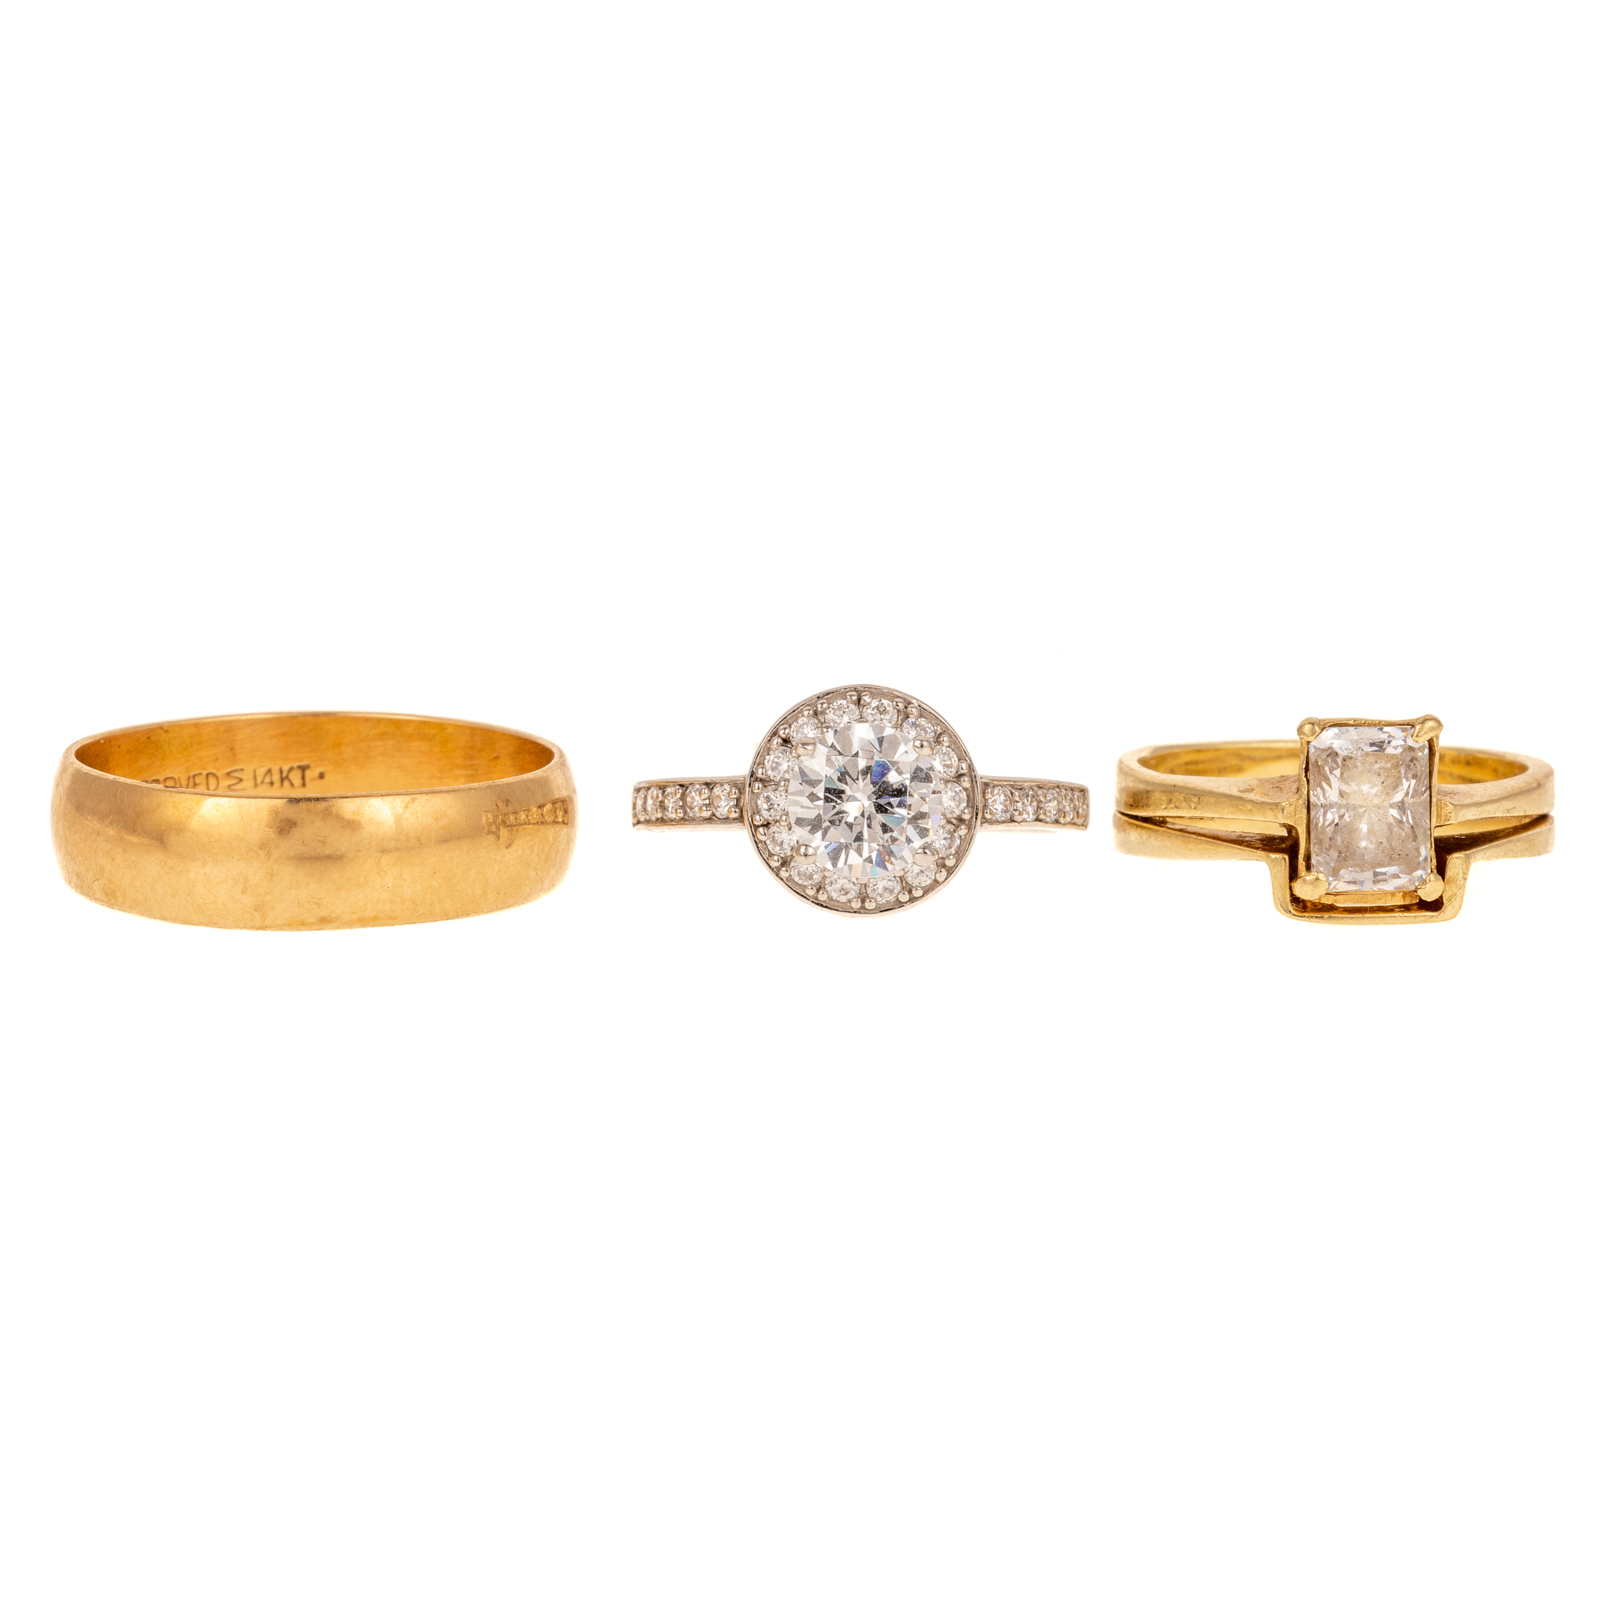 A TRIO OF 14K RINGS WITH CZ S 1  3cb558